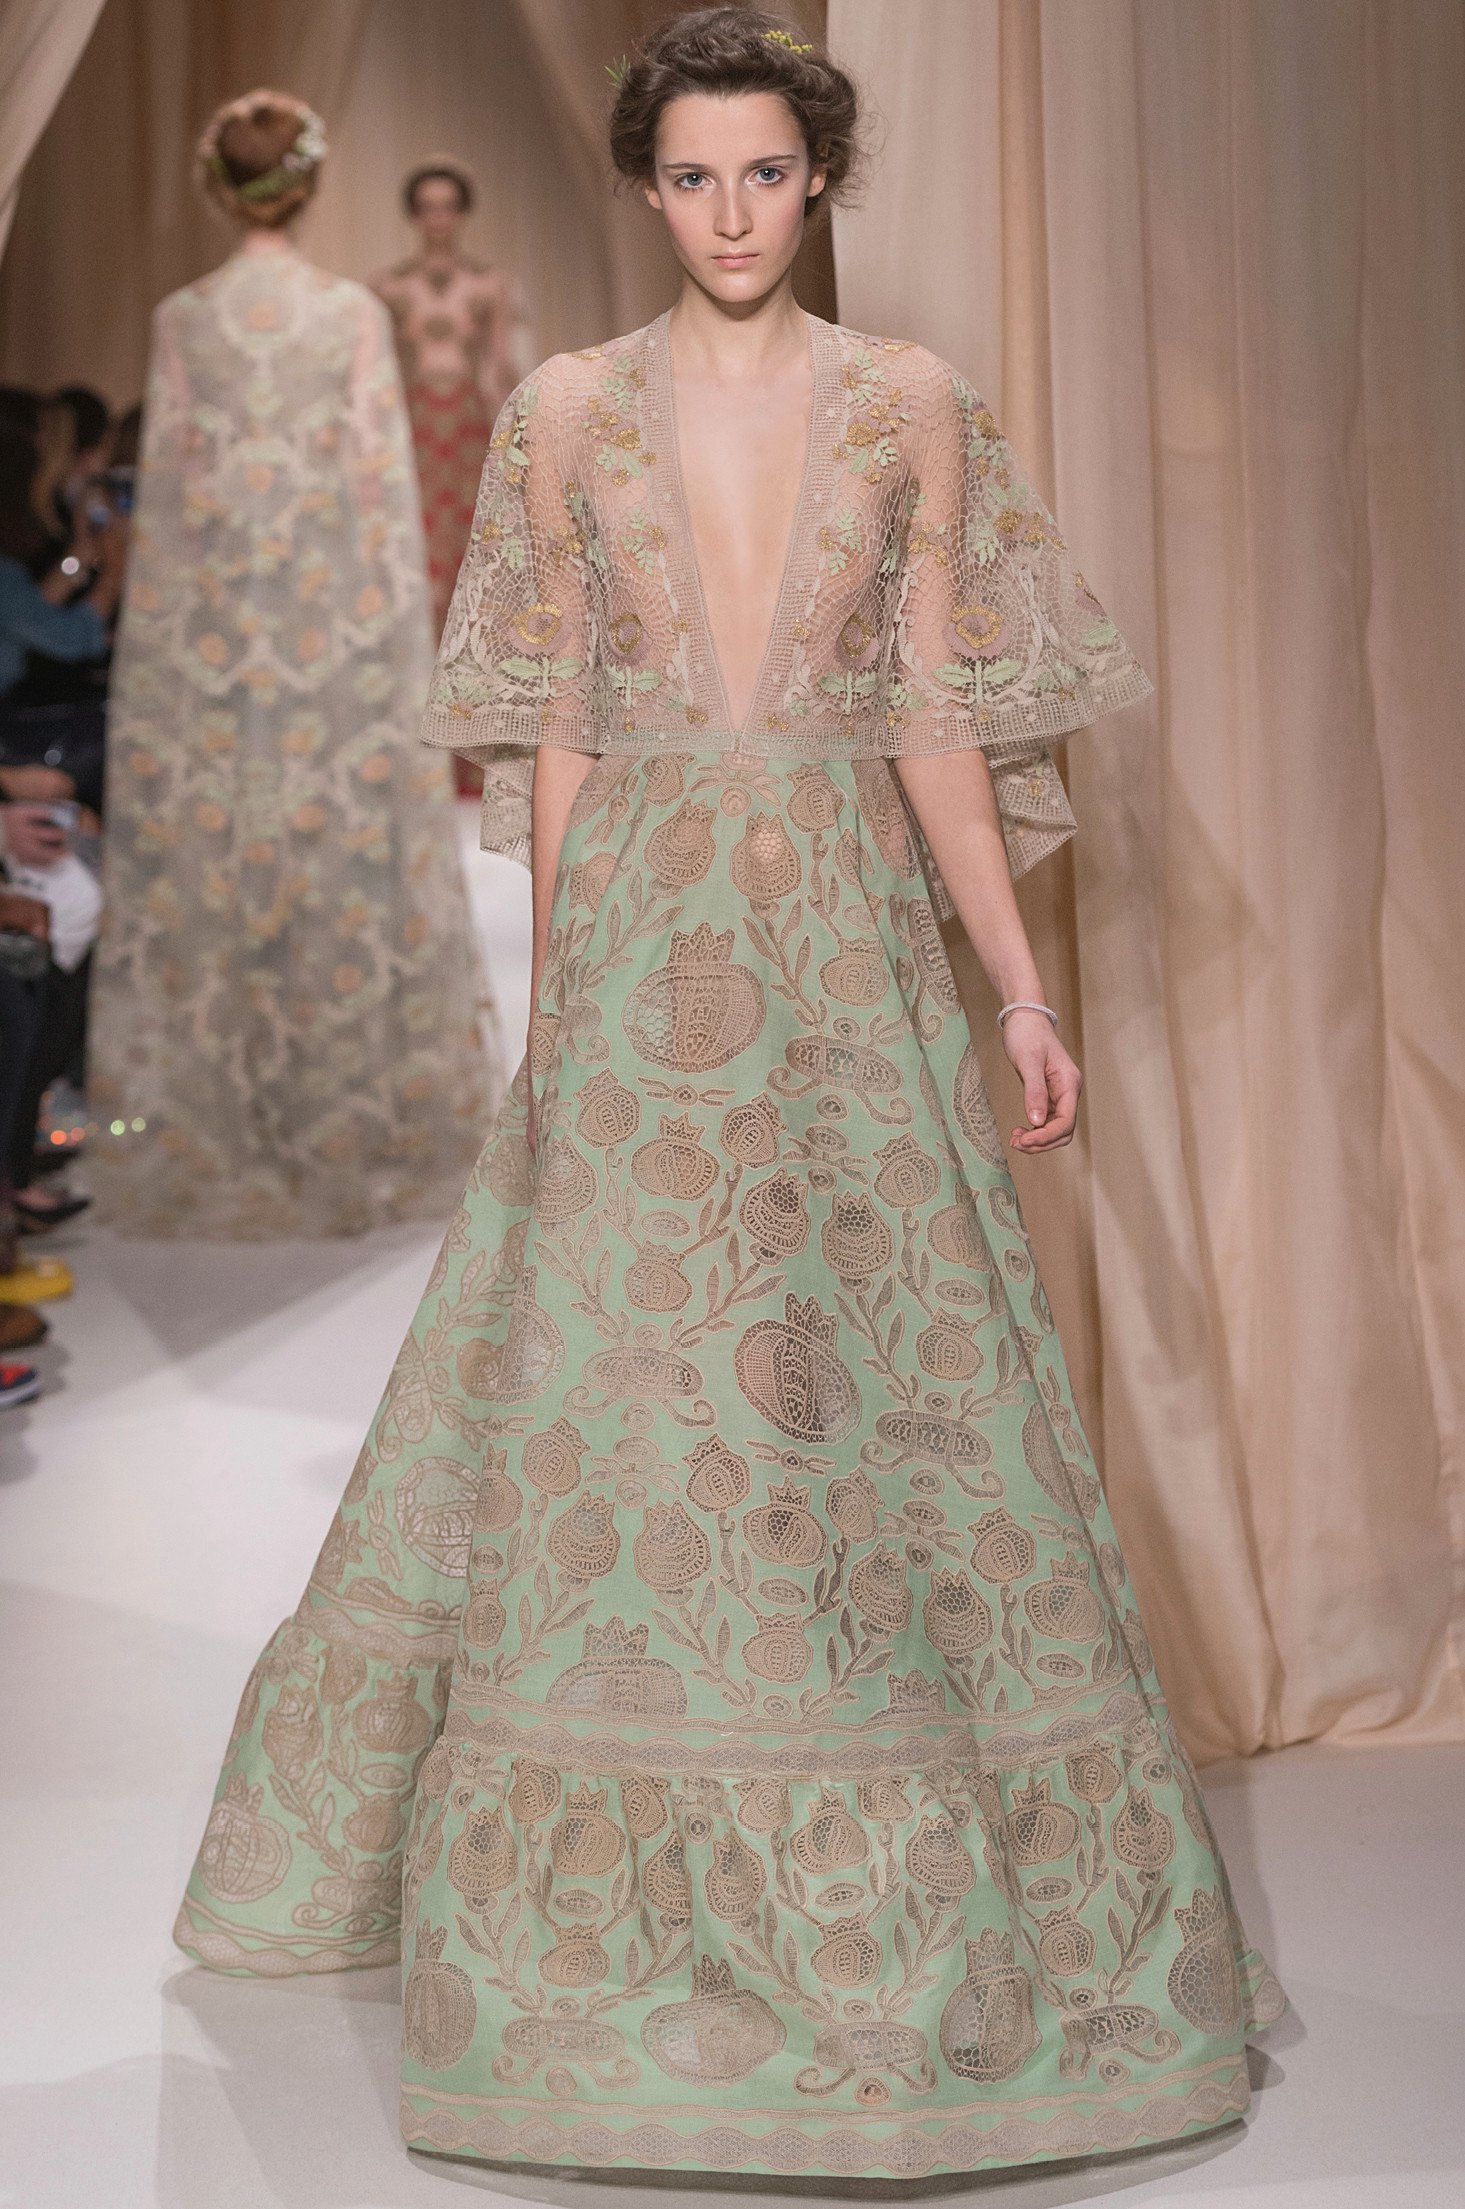 Pomegranate motif from Valentino's S/S 2015 couture collection. Image: Yannis Vlamos/style.com